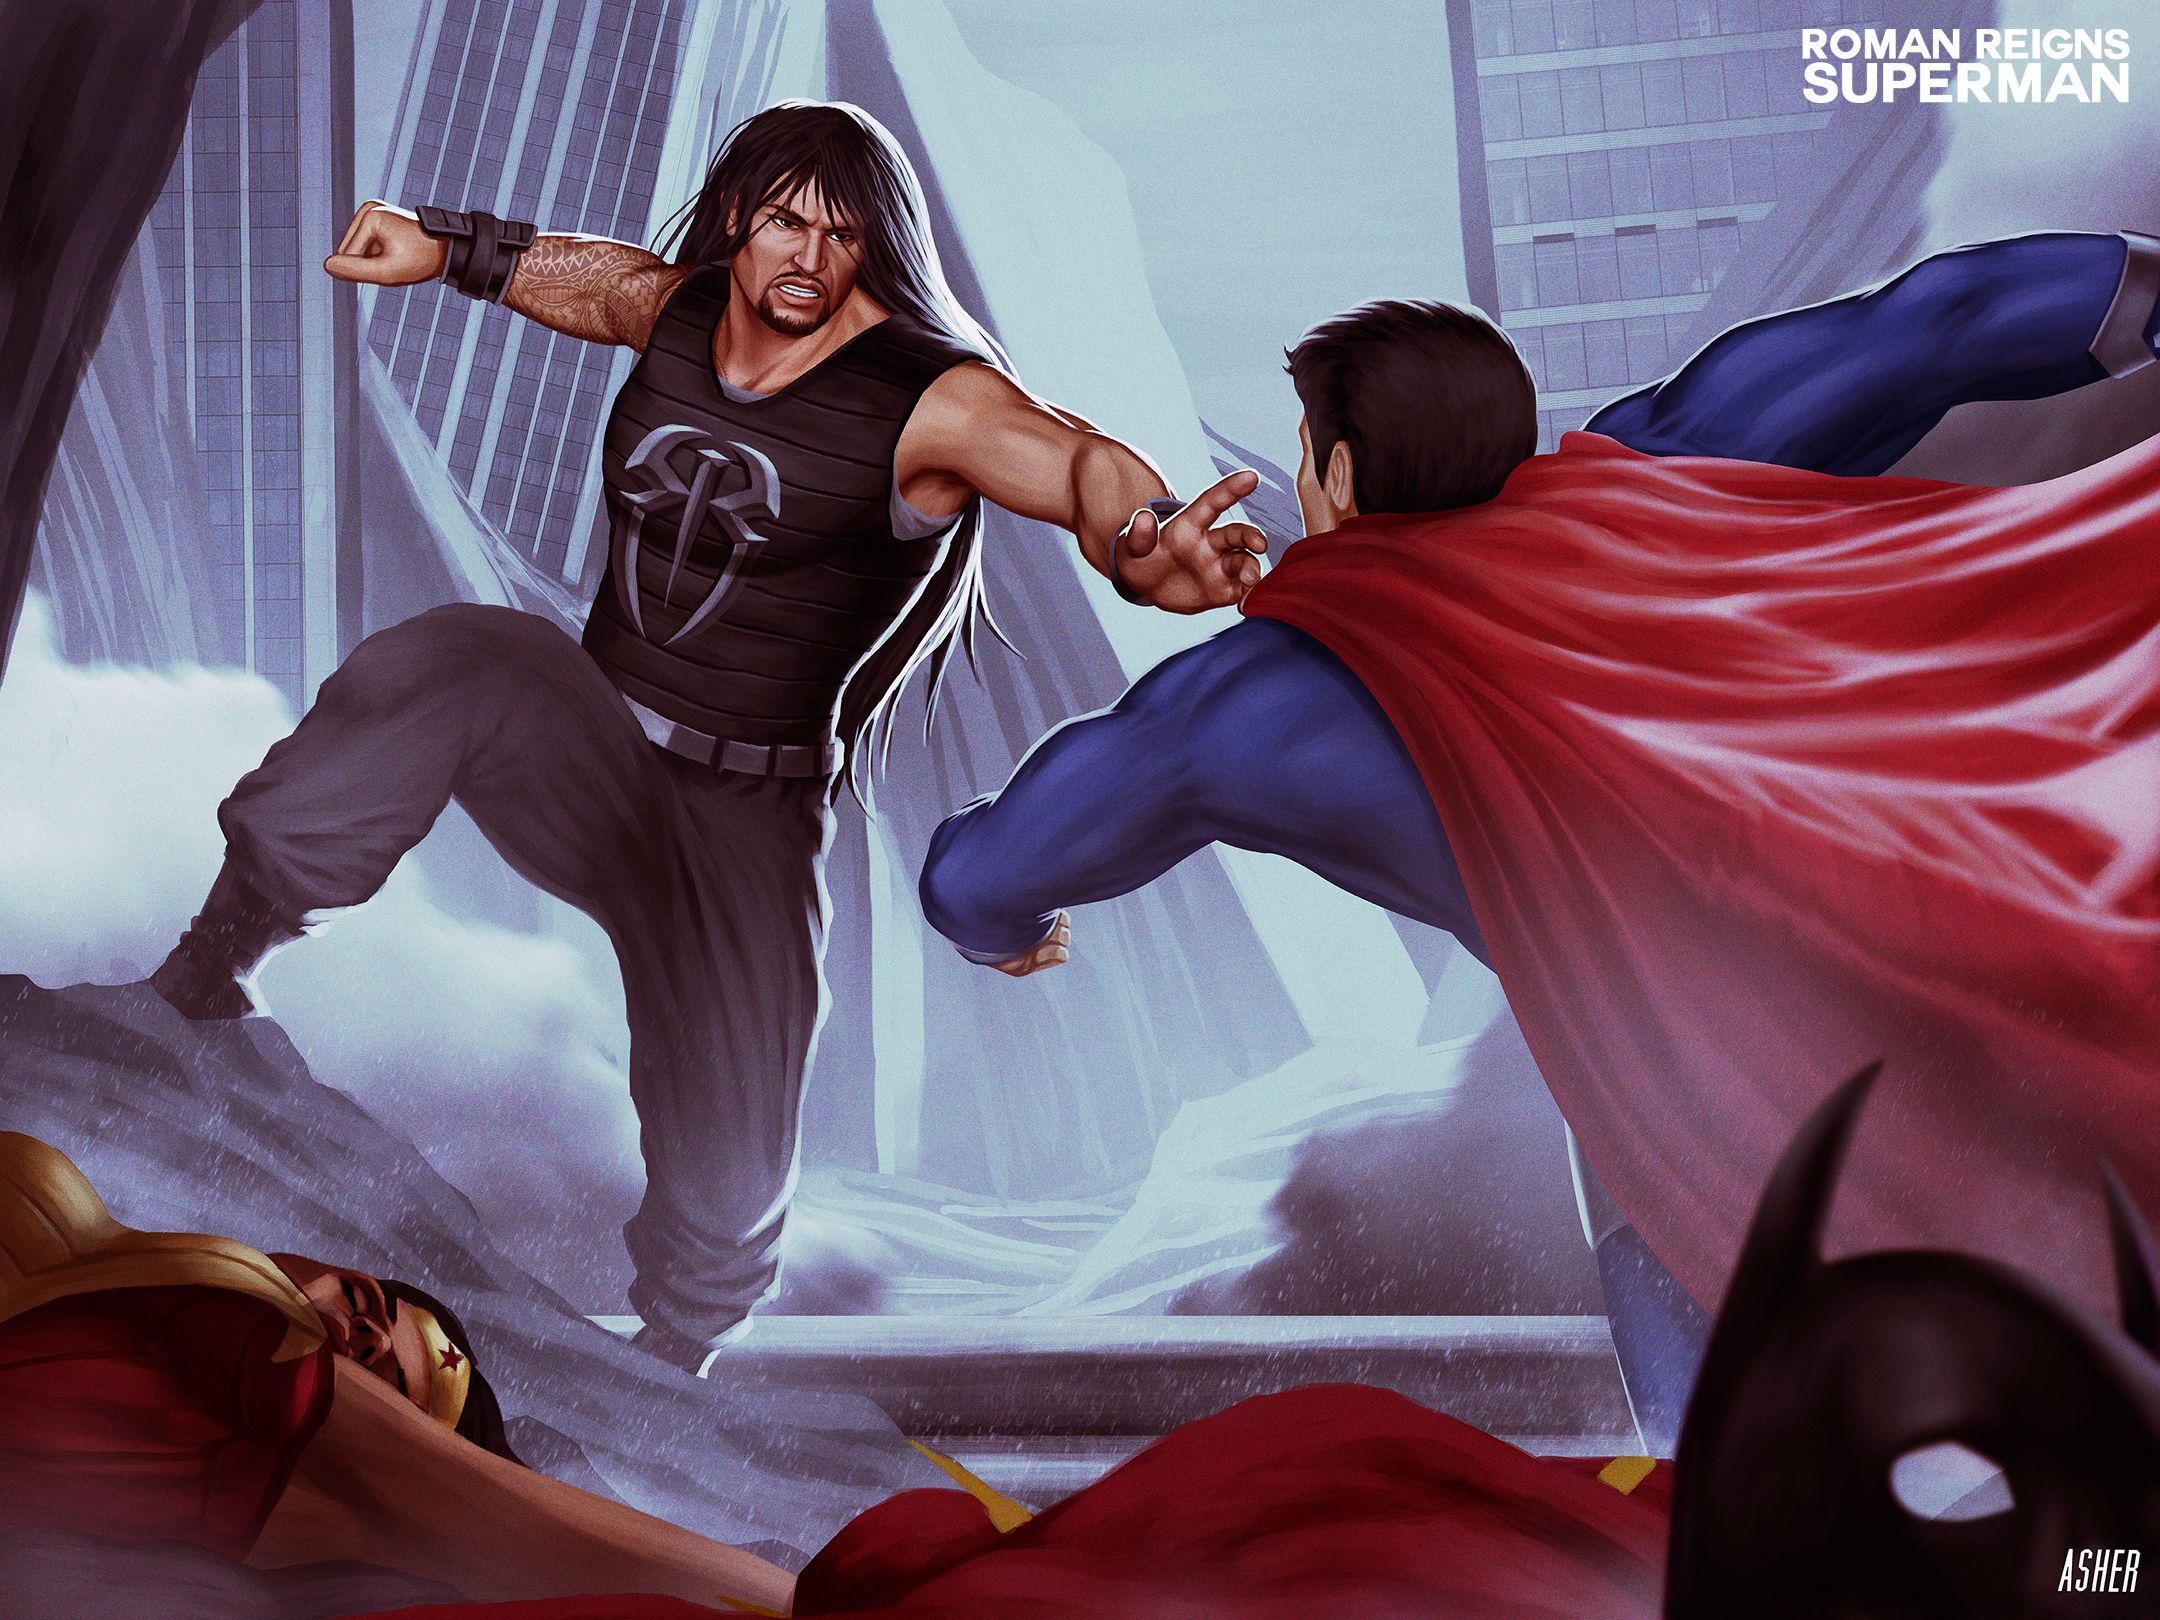 Roman Reigns Vs Superman Art 2048x1152 Resolution HD 4k Wallpaper, Image, Background, Photo and Picture